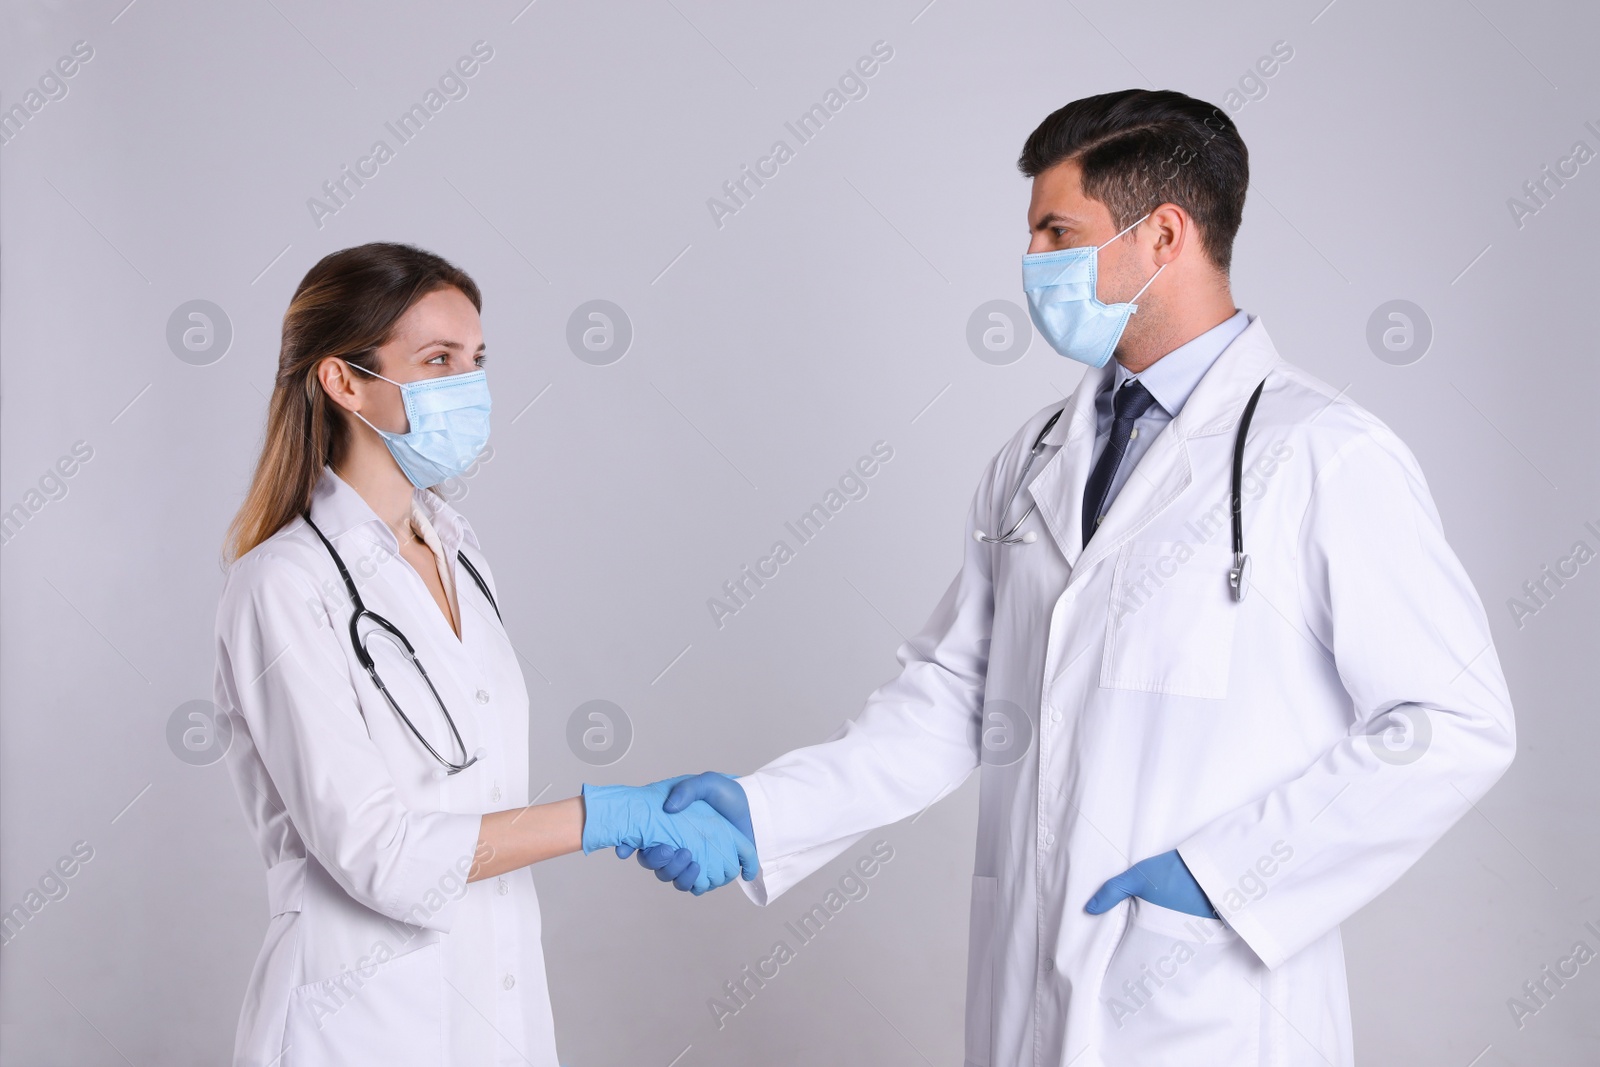 Photo of Doctors shaking hands on light grey background